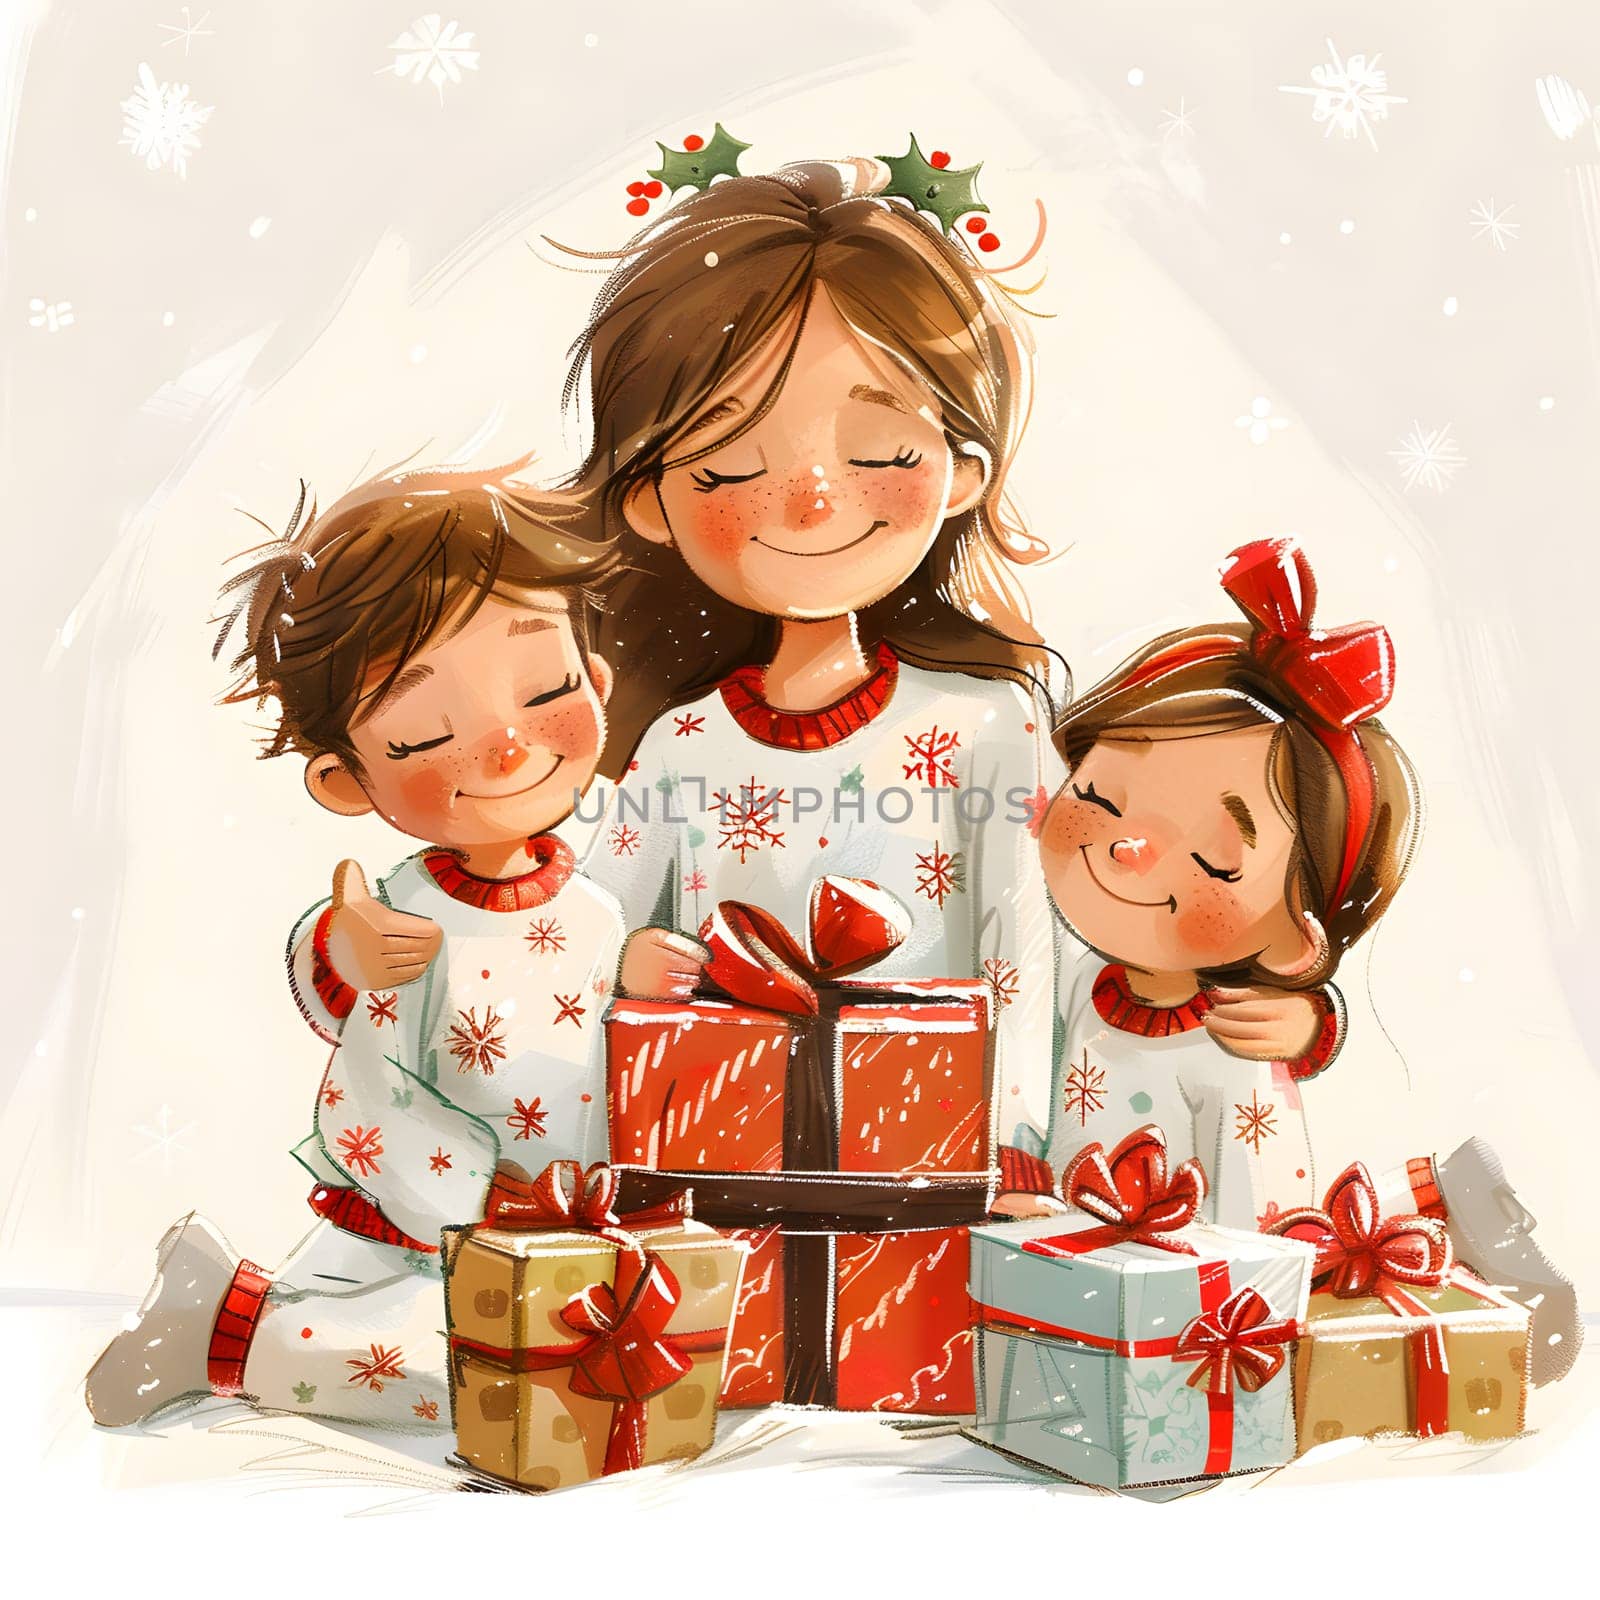 A woman and two children are happily sitting on the floor, surrounded by Christmas presents and decorations. The children, a child and a toddler, are smiling while admiring the holiday ornaments